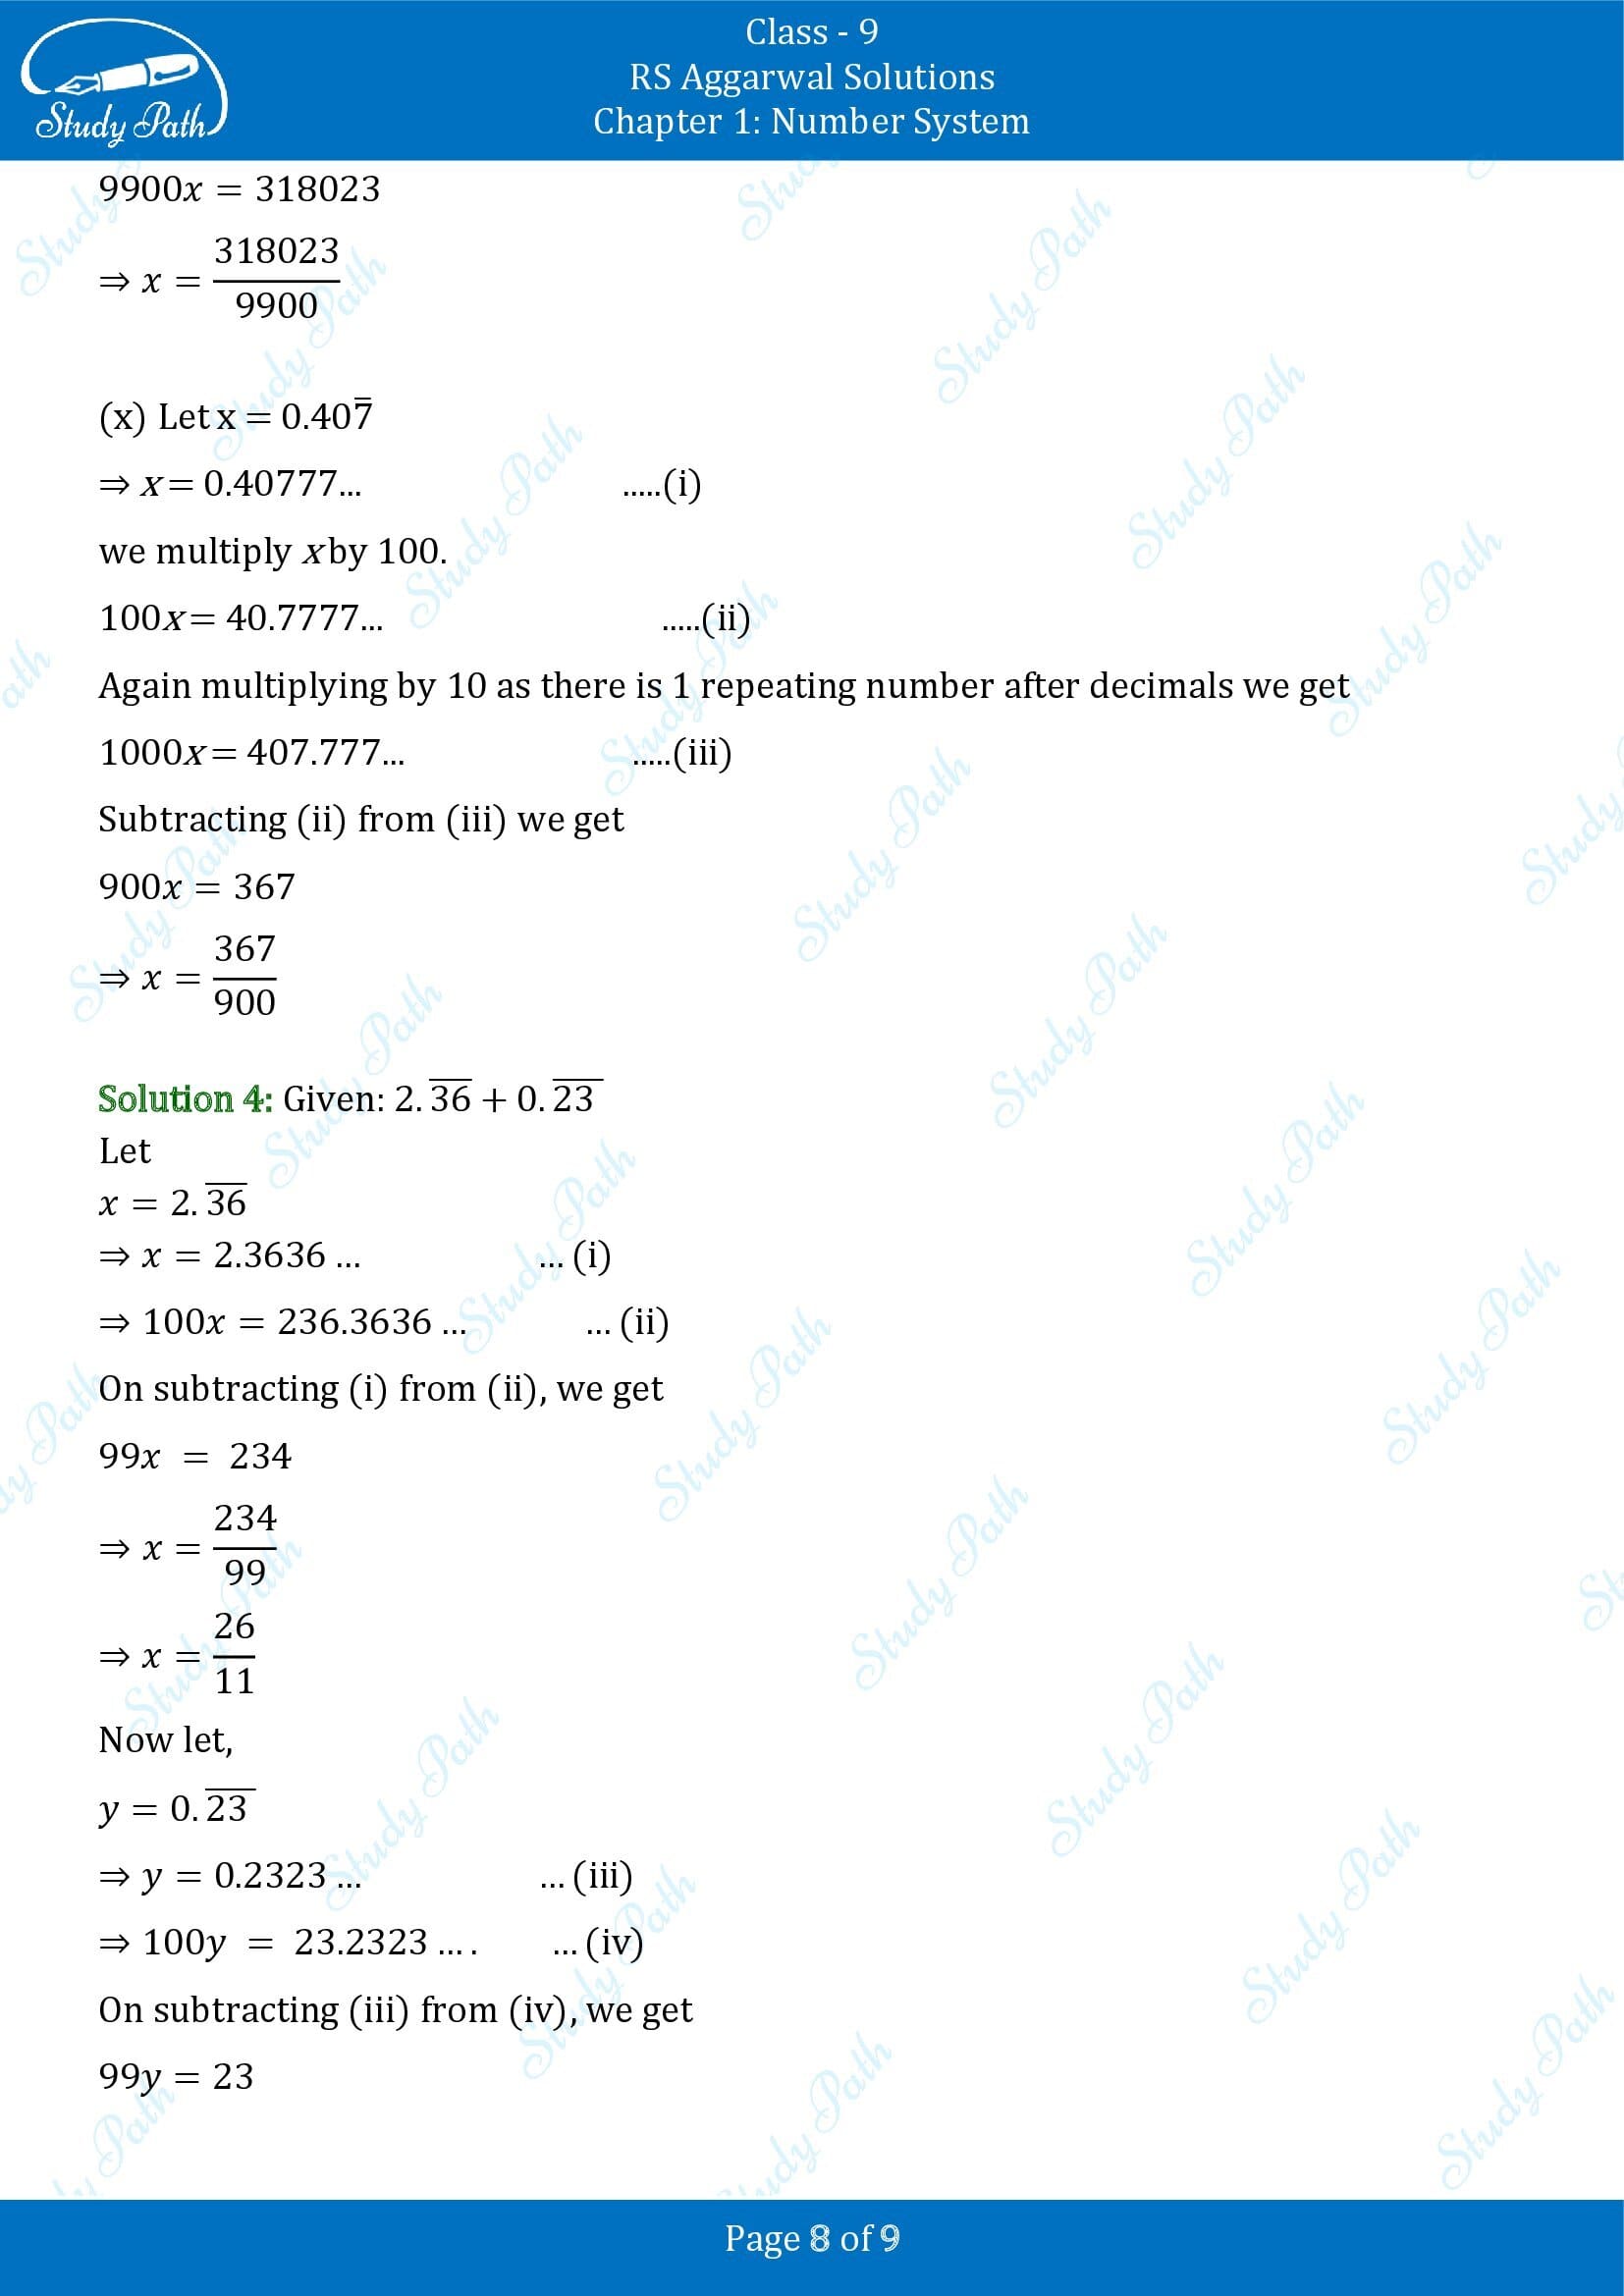 RS Aggarwal Solutions Class 9 Chapter 1 Number System Exercise 1B 00008